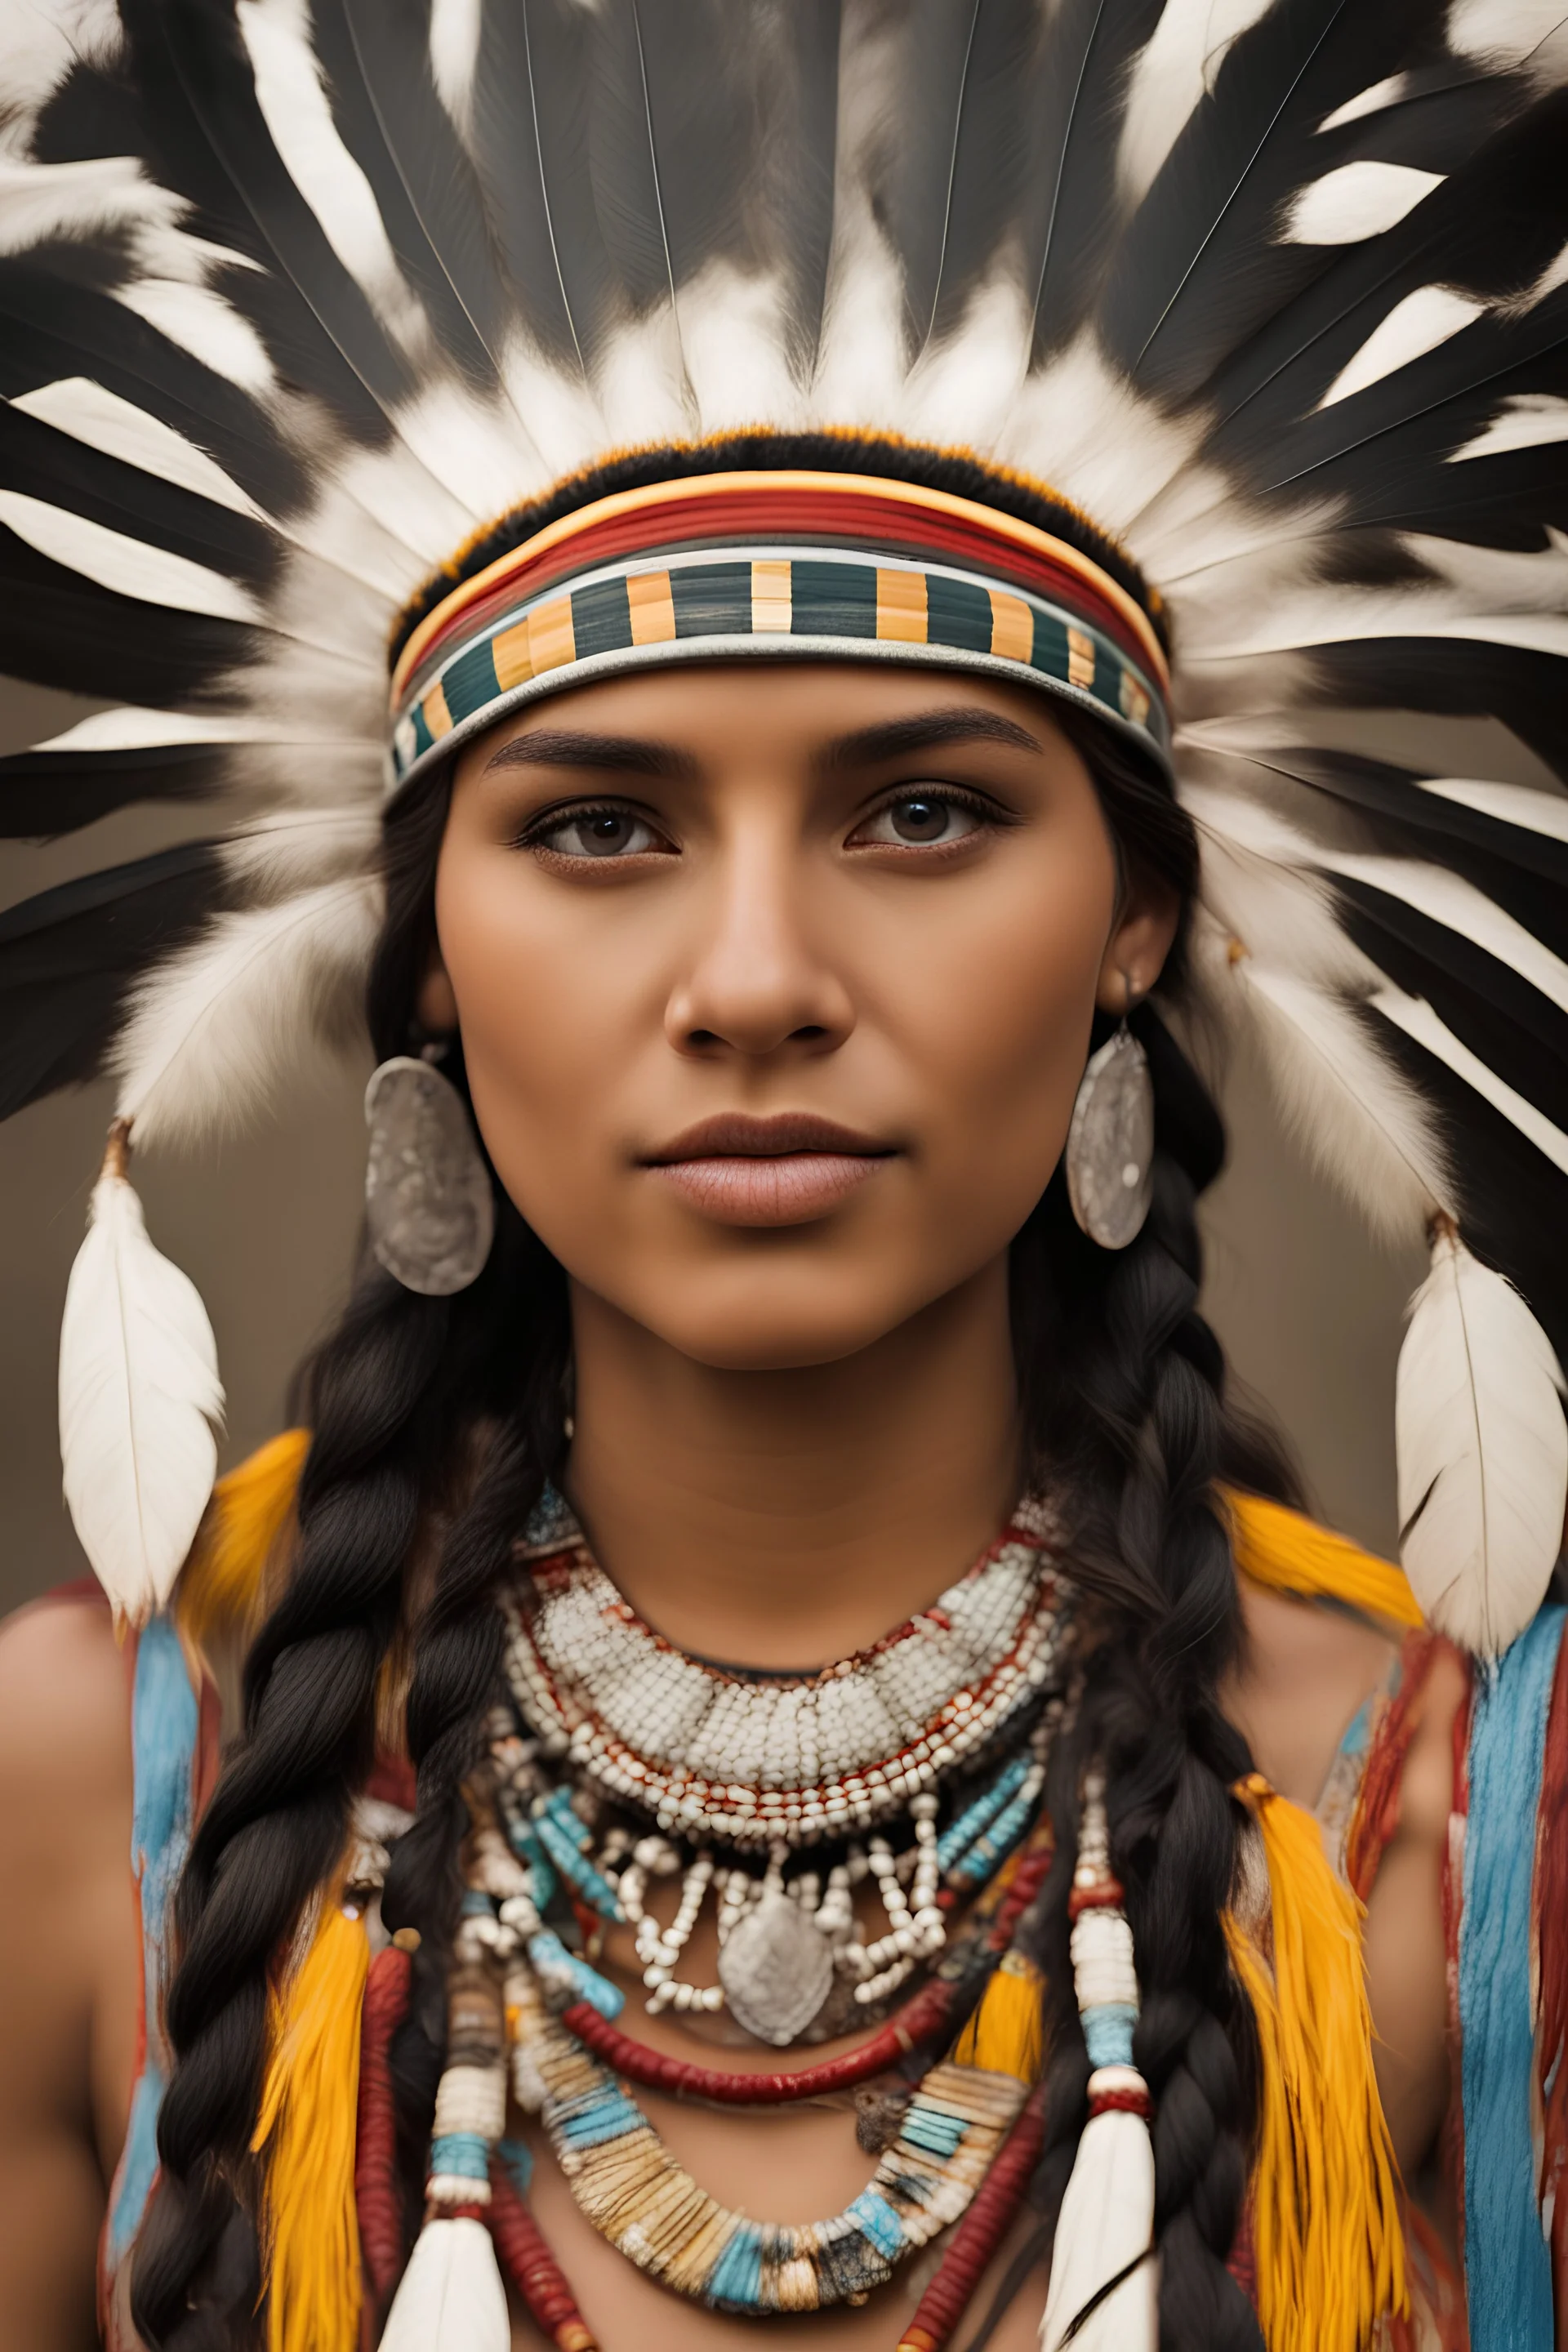 The portrait of the face of a young Latin American Indian woman.